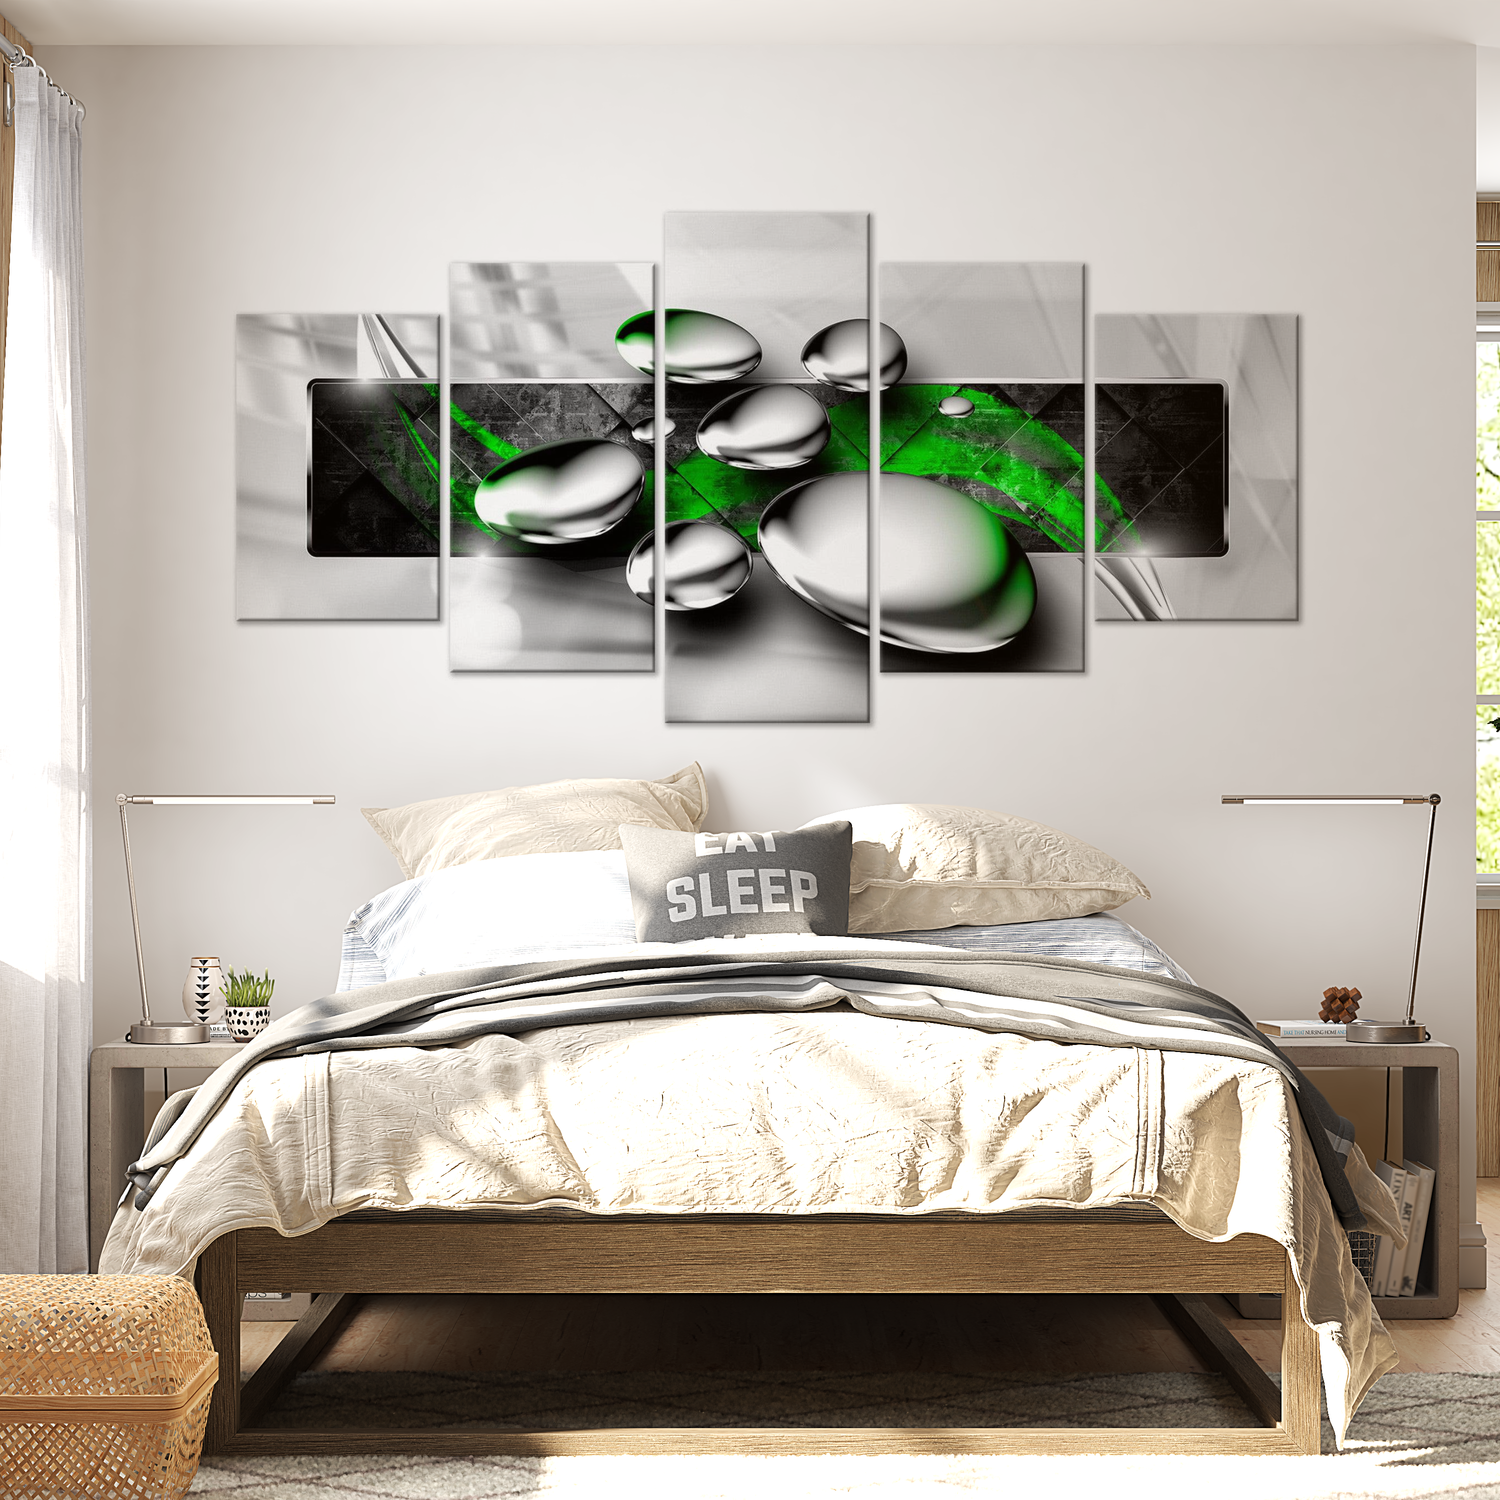 Stretched Canvas Glamour Art - Shiny Stones Green 5 Piece 40"Wx20"H